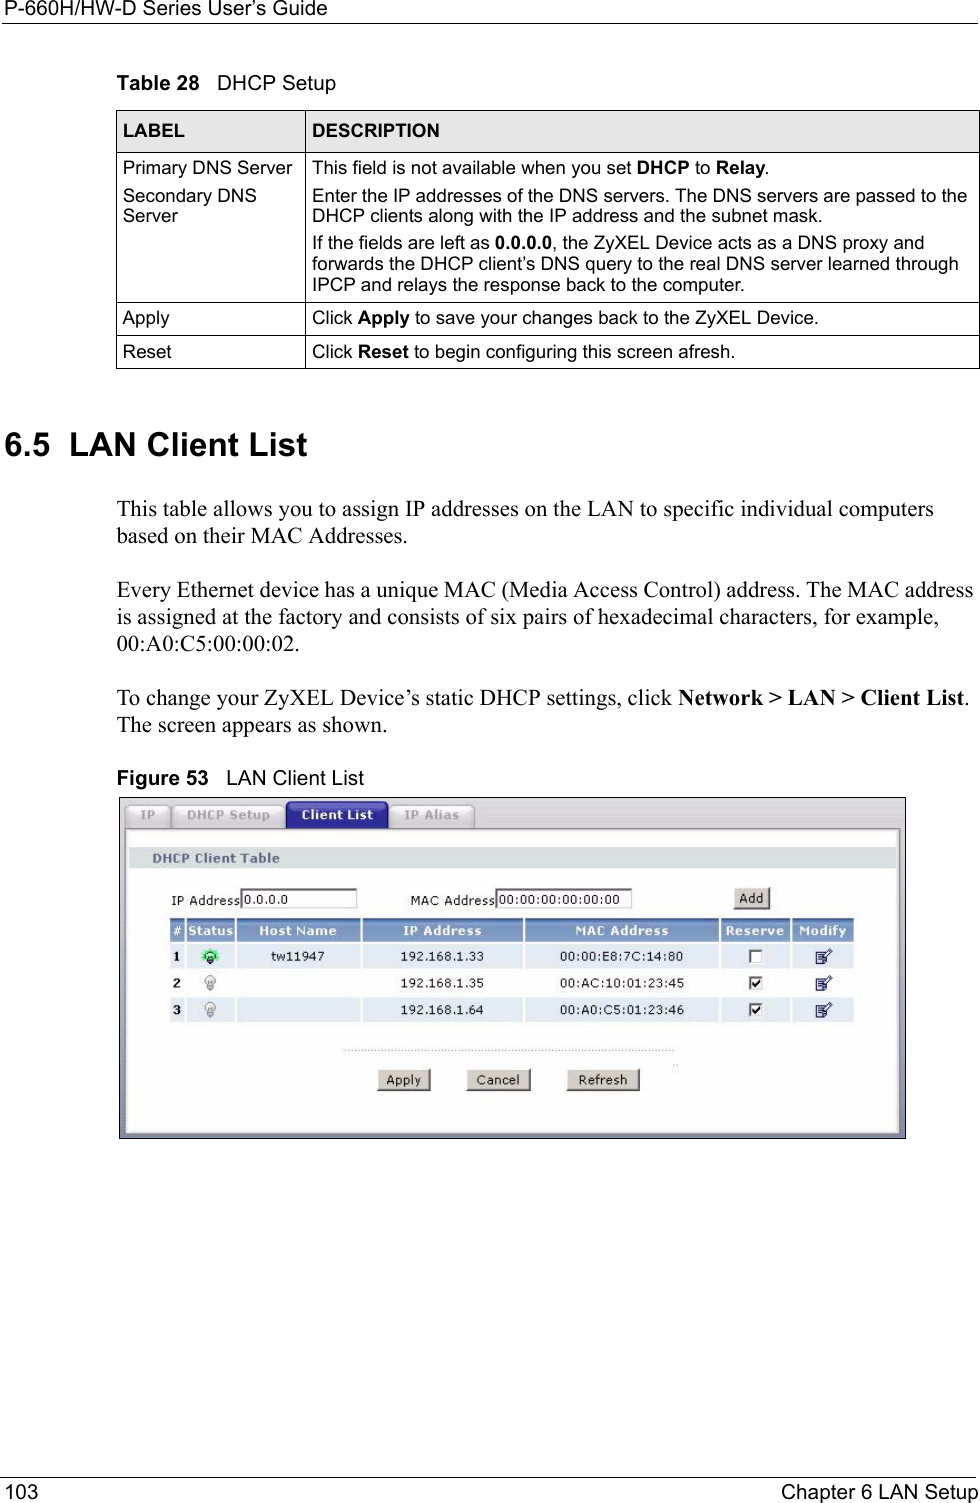 P-660H/HW-D Series User’s Guide103 Chapter 6 LAN Setup6.5  LAN Client ListThis table allows you to assign IP addresses on the LAN to specific individual computers based on their MAC Addresses. Every Ethernet device has a unique MAC (Media Access Control) address. The MAC address is assigned at the factory and consists of six pairs of hexadecimal characters, for example, 00:A0:C5:00:00:02.To change your ZyXEL Device’s static DHCP settings, click Network &gt; LAN &gt; Client List. The screen appears as shown.Figure 53   LAN Client ListPrimary DNS ServerSecondary DNS ServerThis field is not available when you set DHCP to Relay.Enter the IP addresses of the DNS servers. The DNS servers are passed to the DHCP clients along with the IP address and the subnet mask.If the fields are left as 0.0.0.0, the ZyXEL Device acts as a DNS proxy and forwards the DHCP client’s DNS query to the real DNS server learned through IPCP and relays the response back to the computer.Apply Click Apply to save your changes back to the ZyXEL Device.Reset Click Reset to begin configuring this screen afresh.Table 28   DHCP SetupLABEL DESCRIPTION